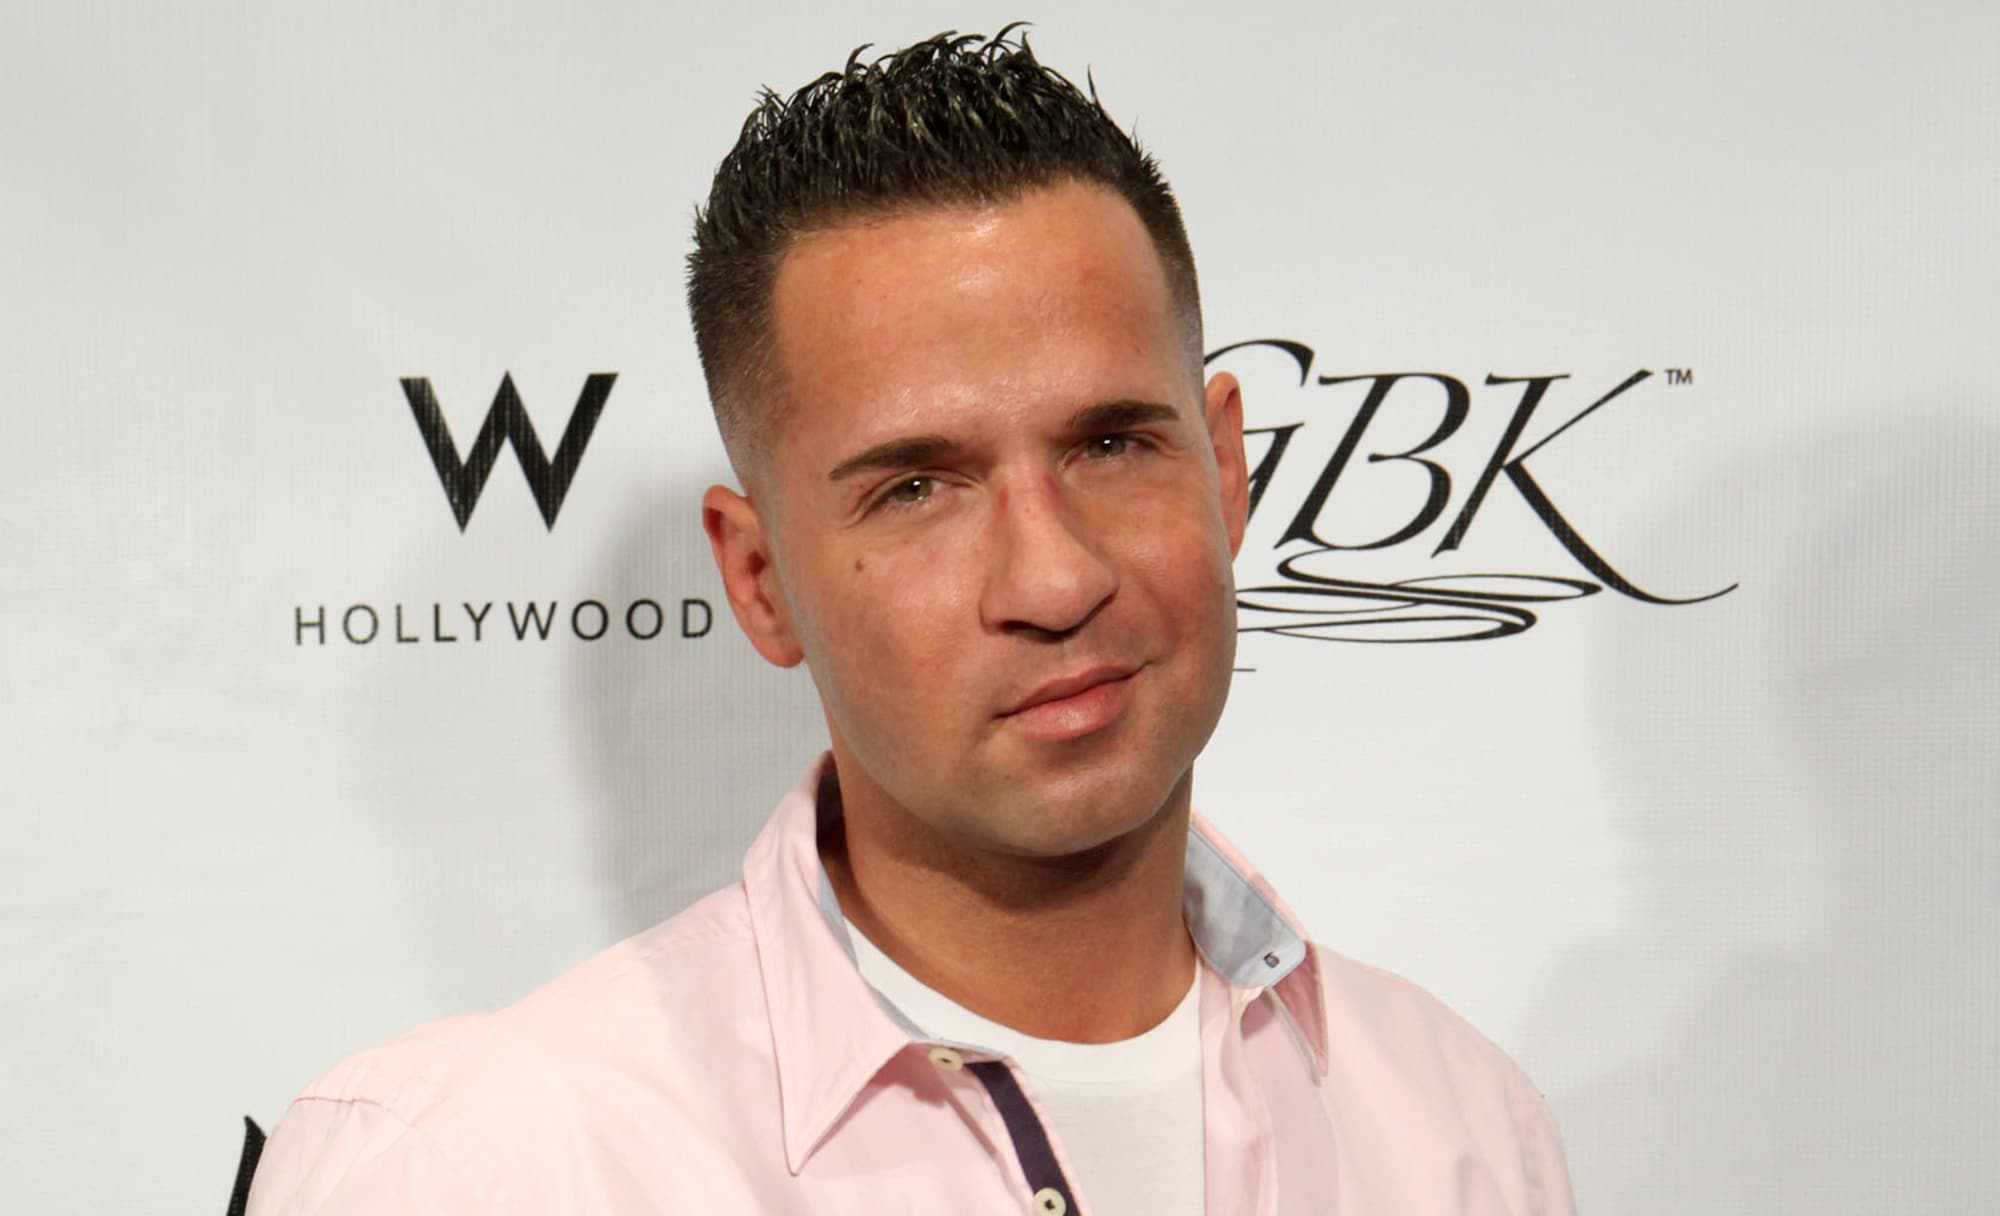 Mike The Situation from Jersey Shore